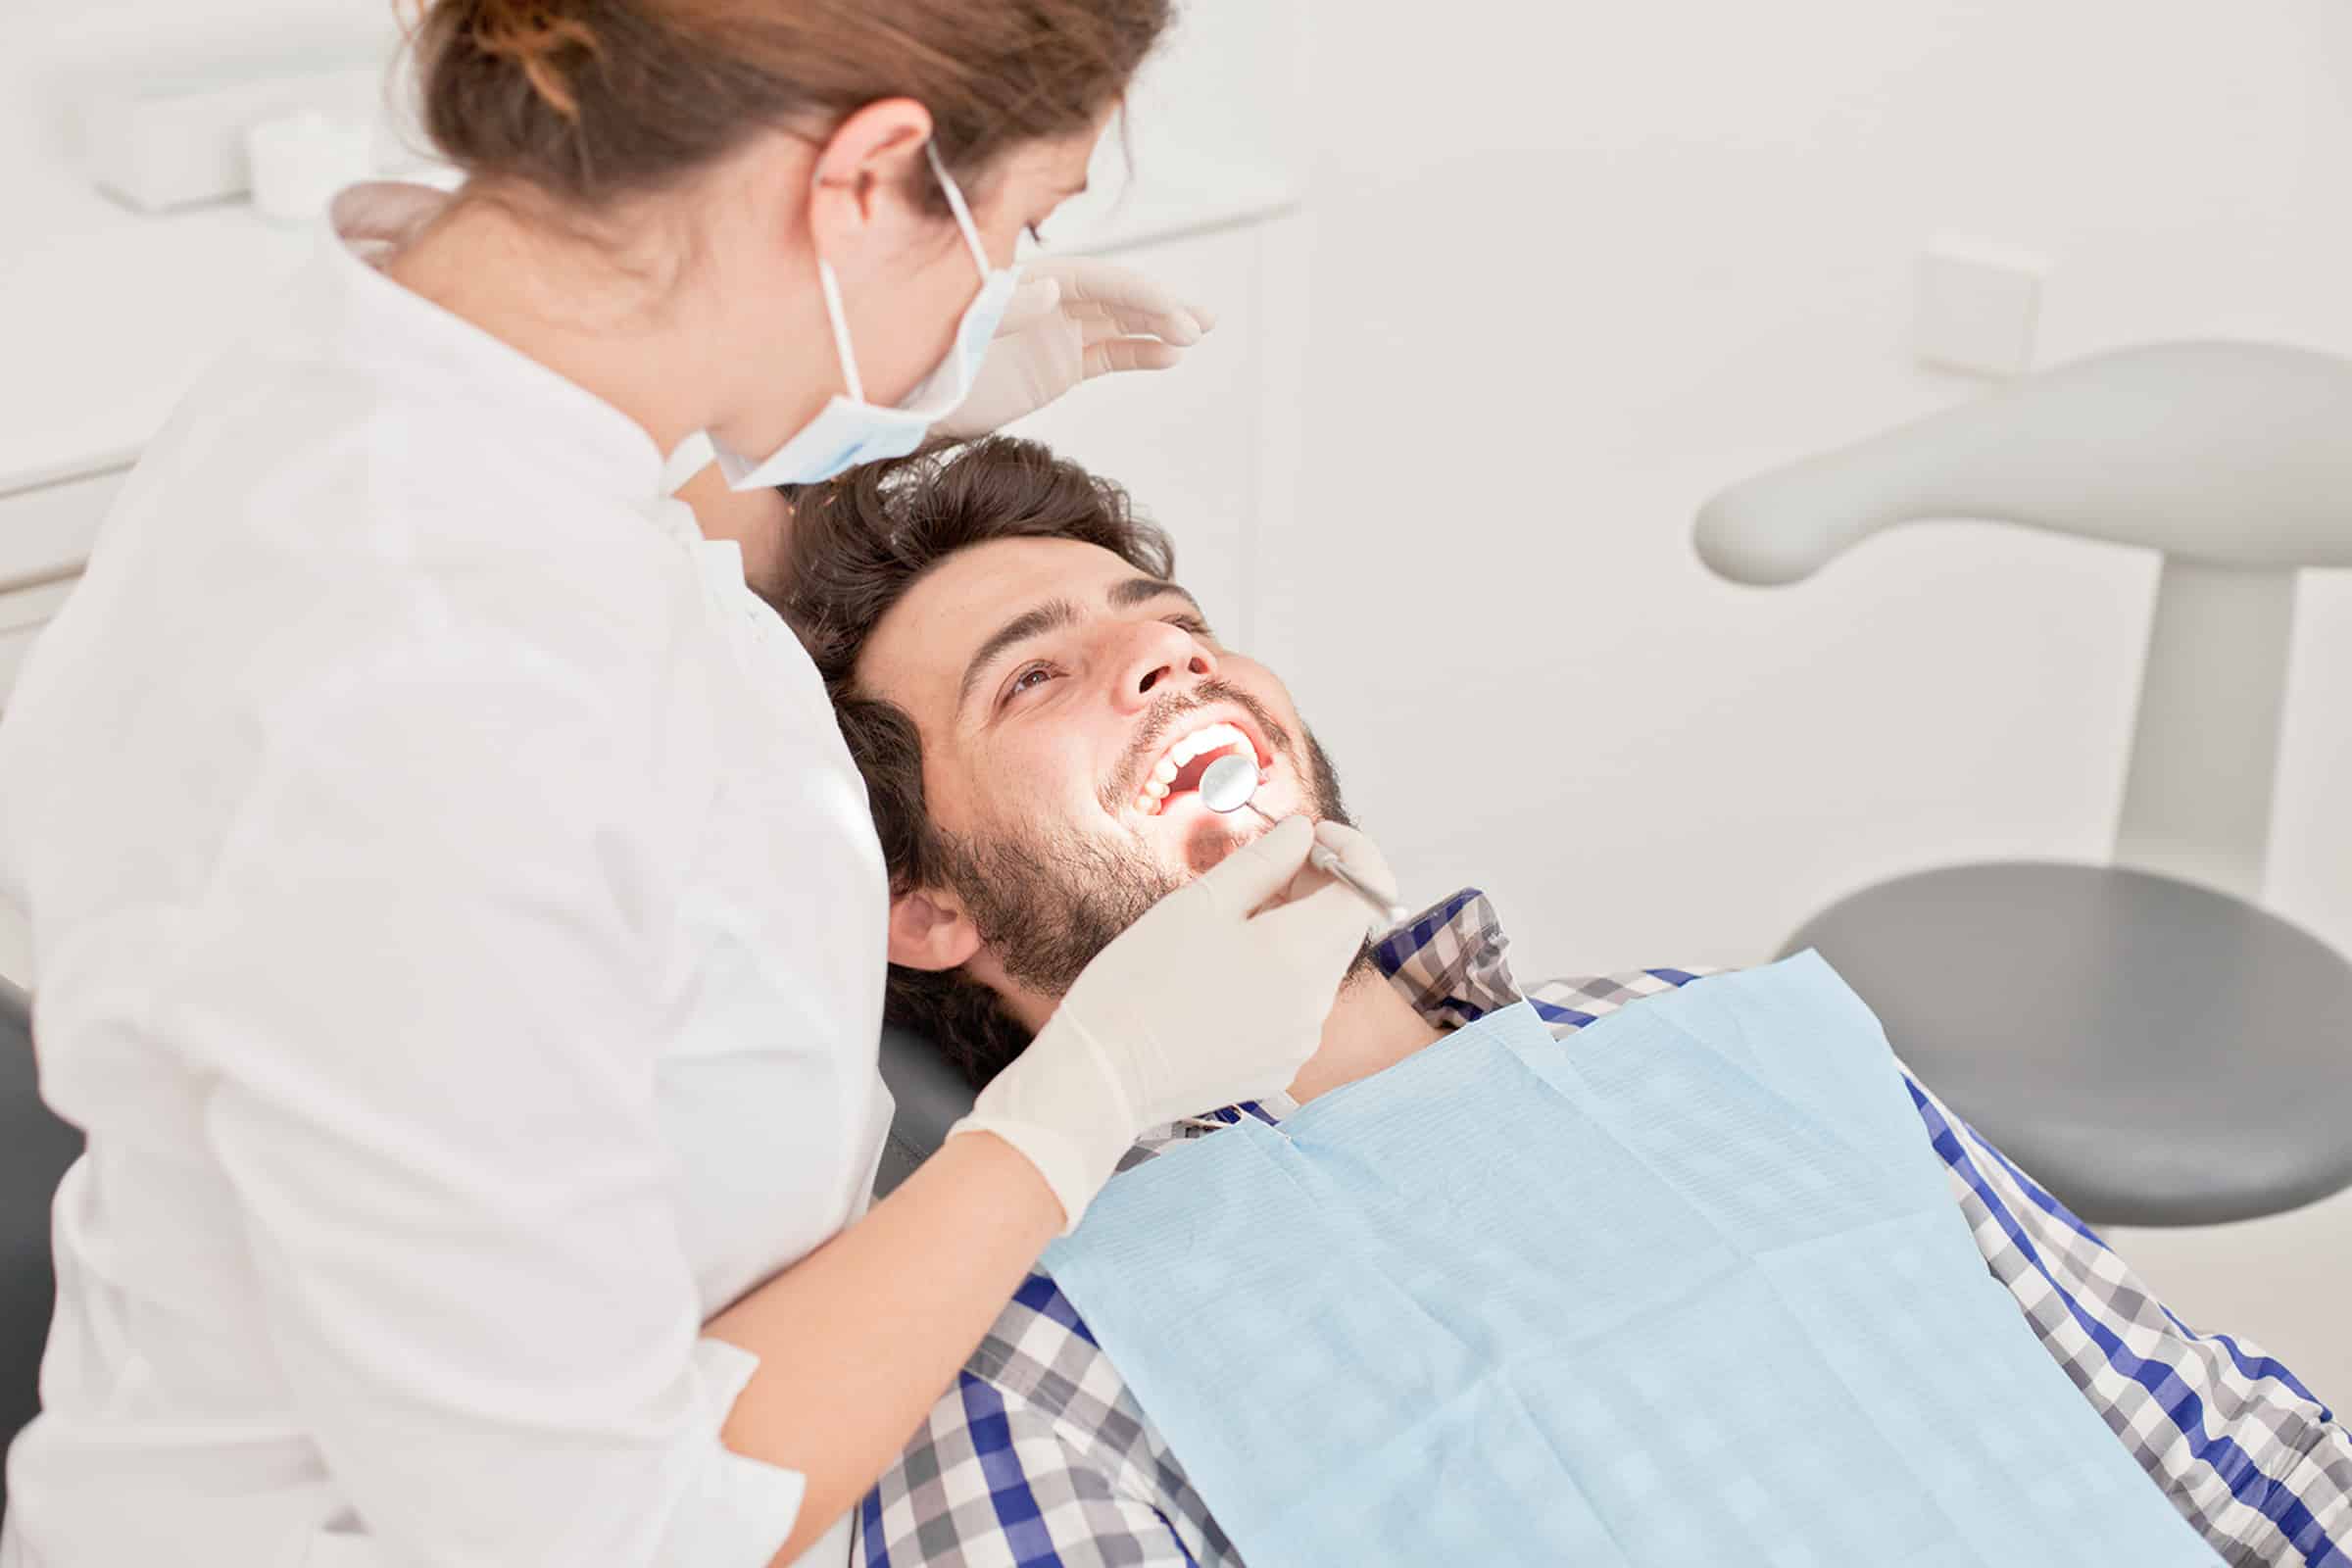 Man getting a dental implant consultation at the dentist in Ridgeland, MS